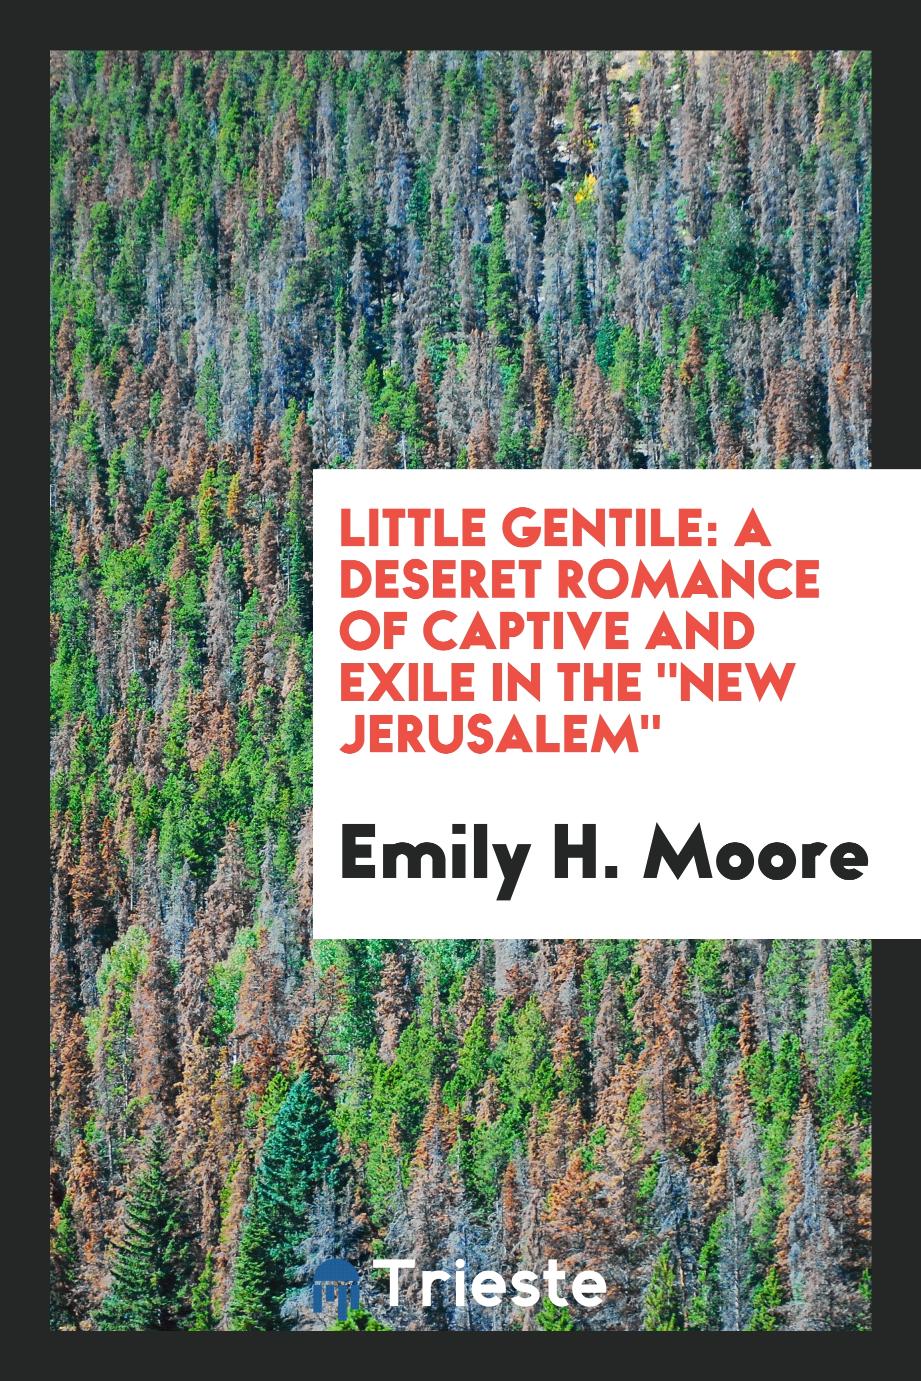 Little Gentile: A Deseret Romance of Captive and Exile in the "New Jerusalem"